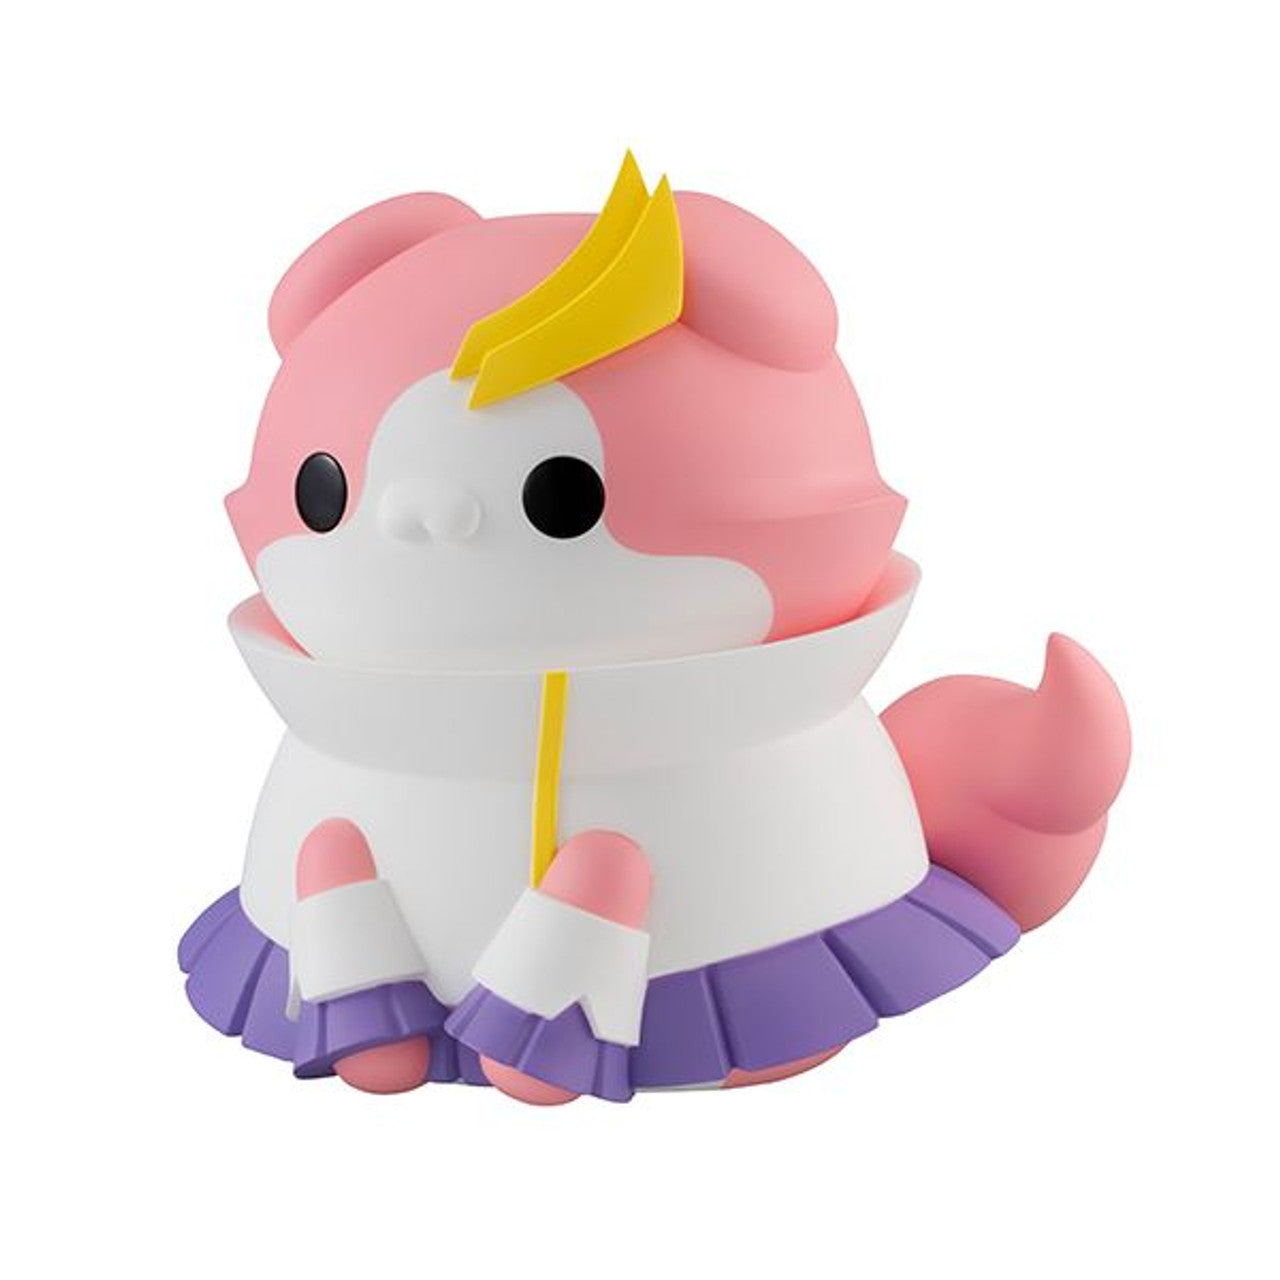 MOBILE SUIT GUNDAM SEED - MEGA CAT PROJECT NYANTO! THE BIG SERIES NYANDAM SEED - LACUS CLYNE **Pre-Order**